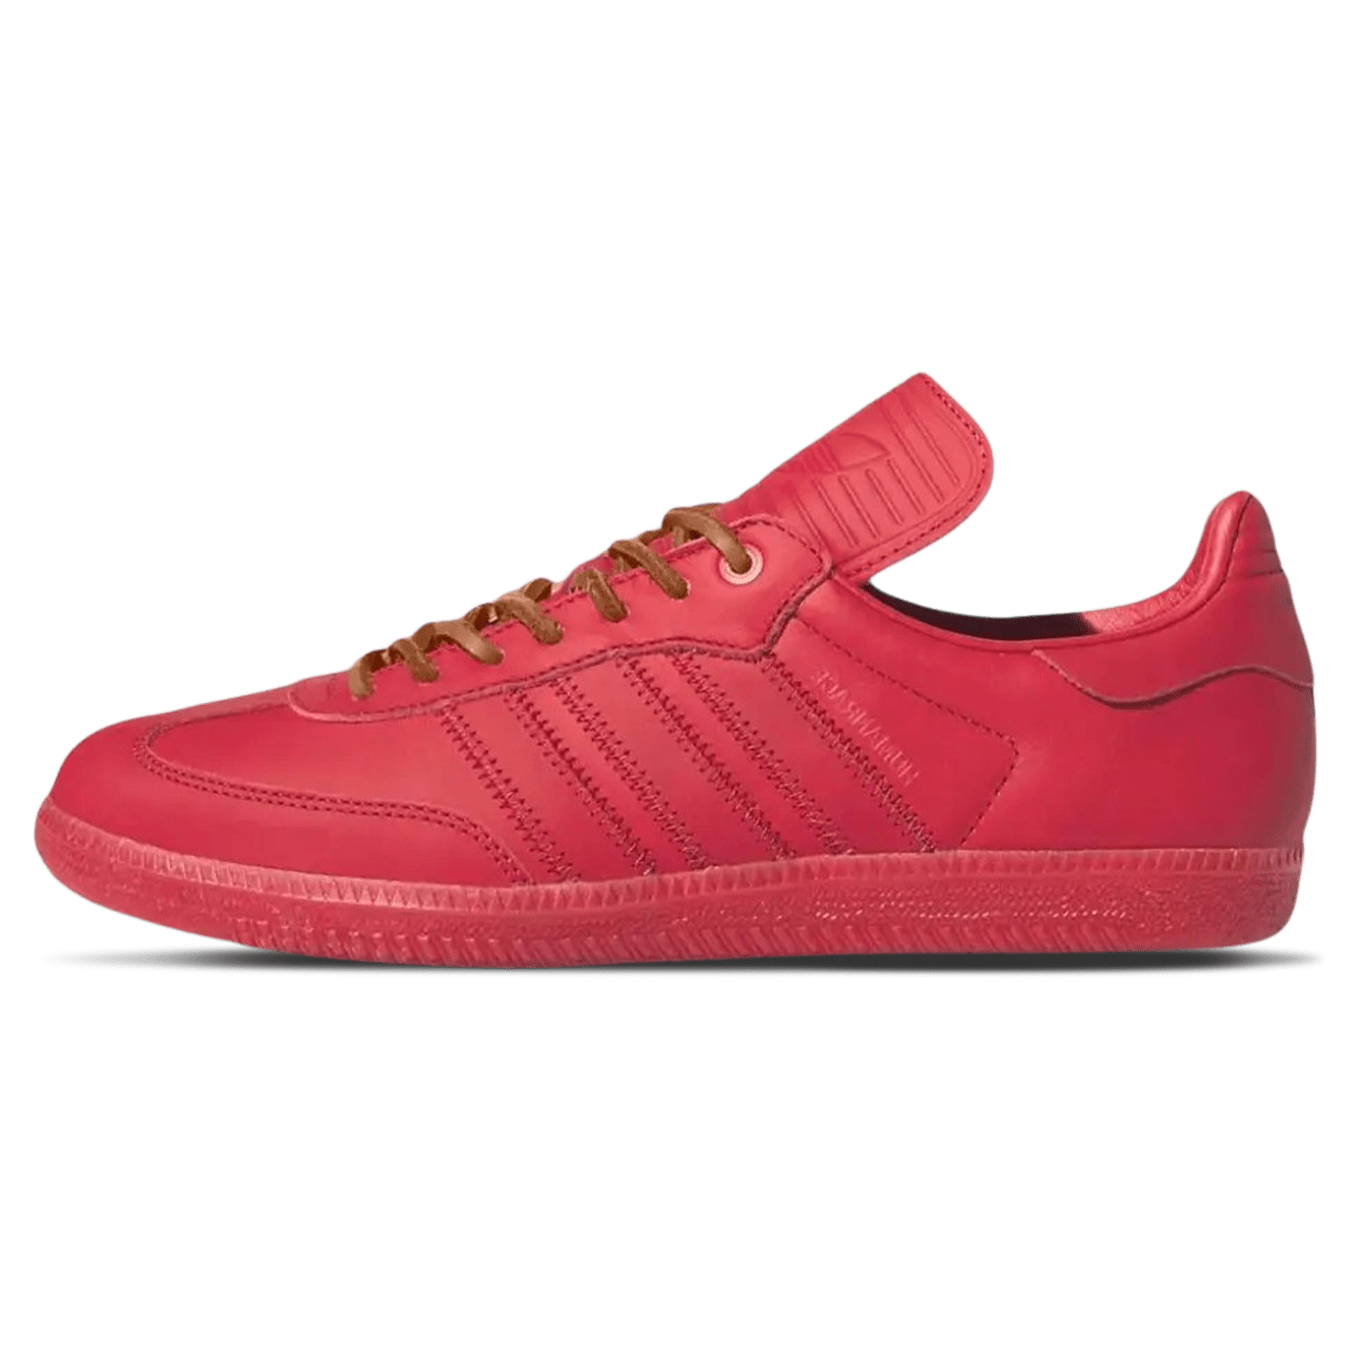 LOUIS VUITTON Leather Zip up Sneakers Shoes 7.5 Red Auth Men Used from Japan